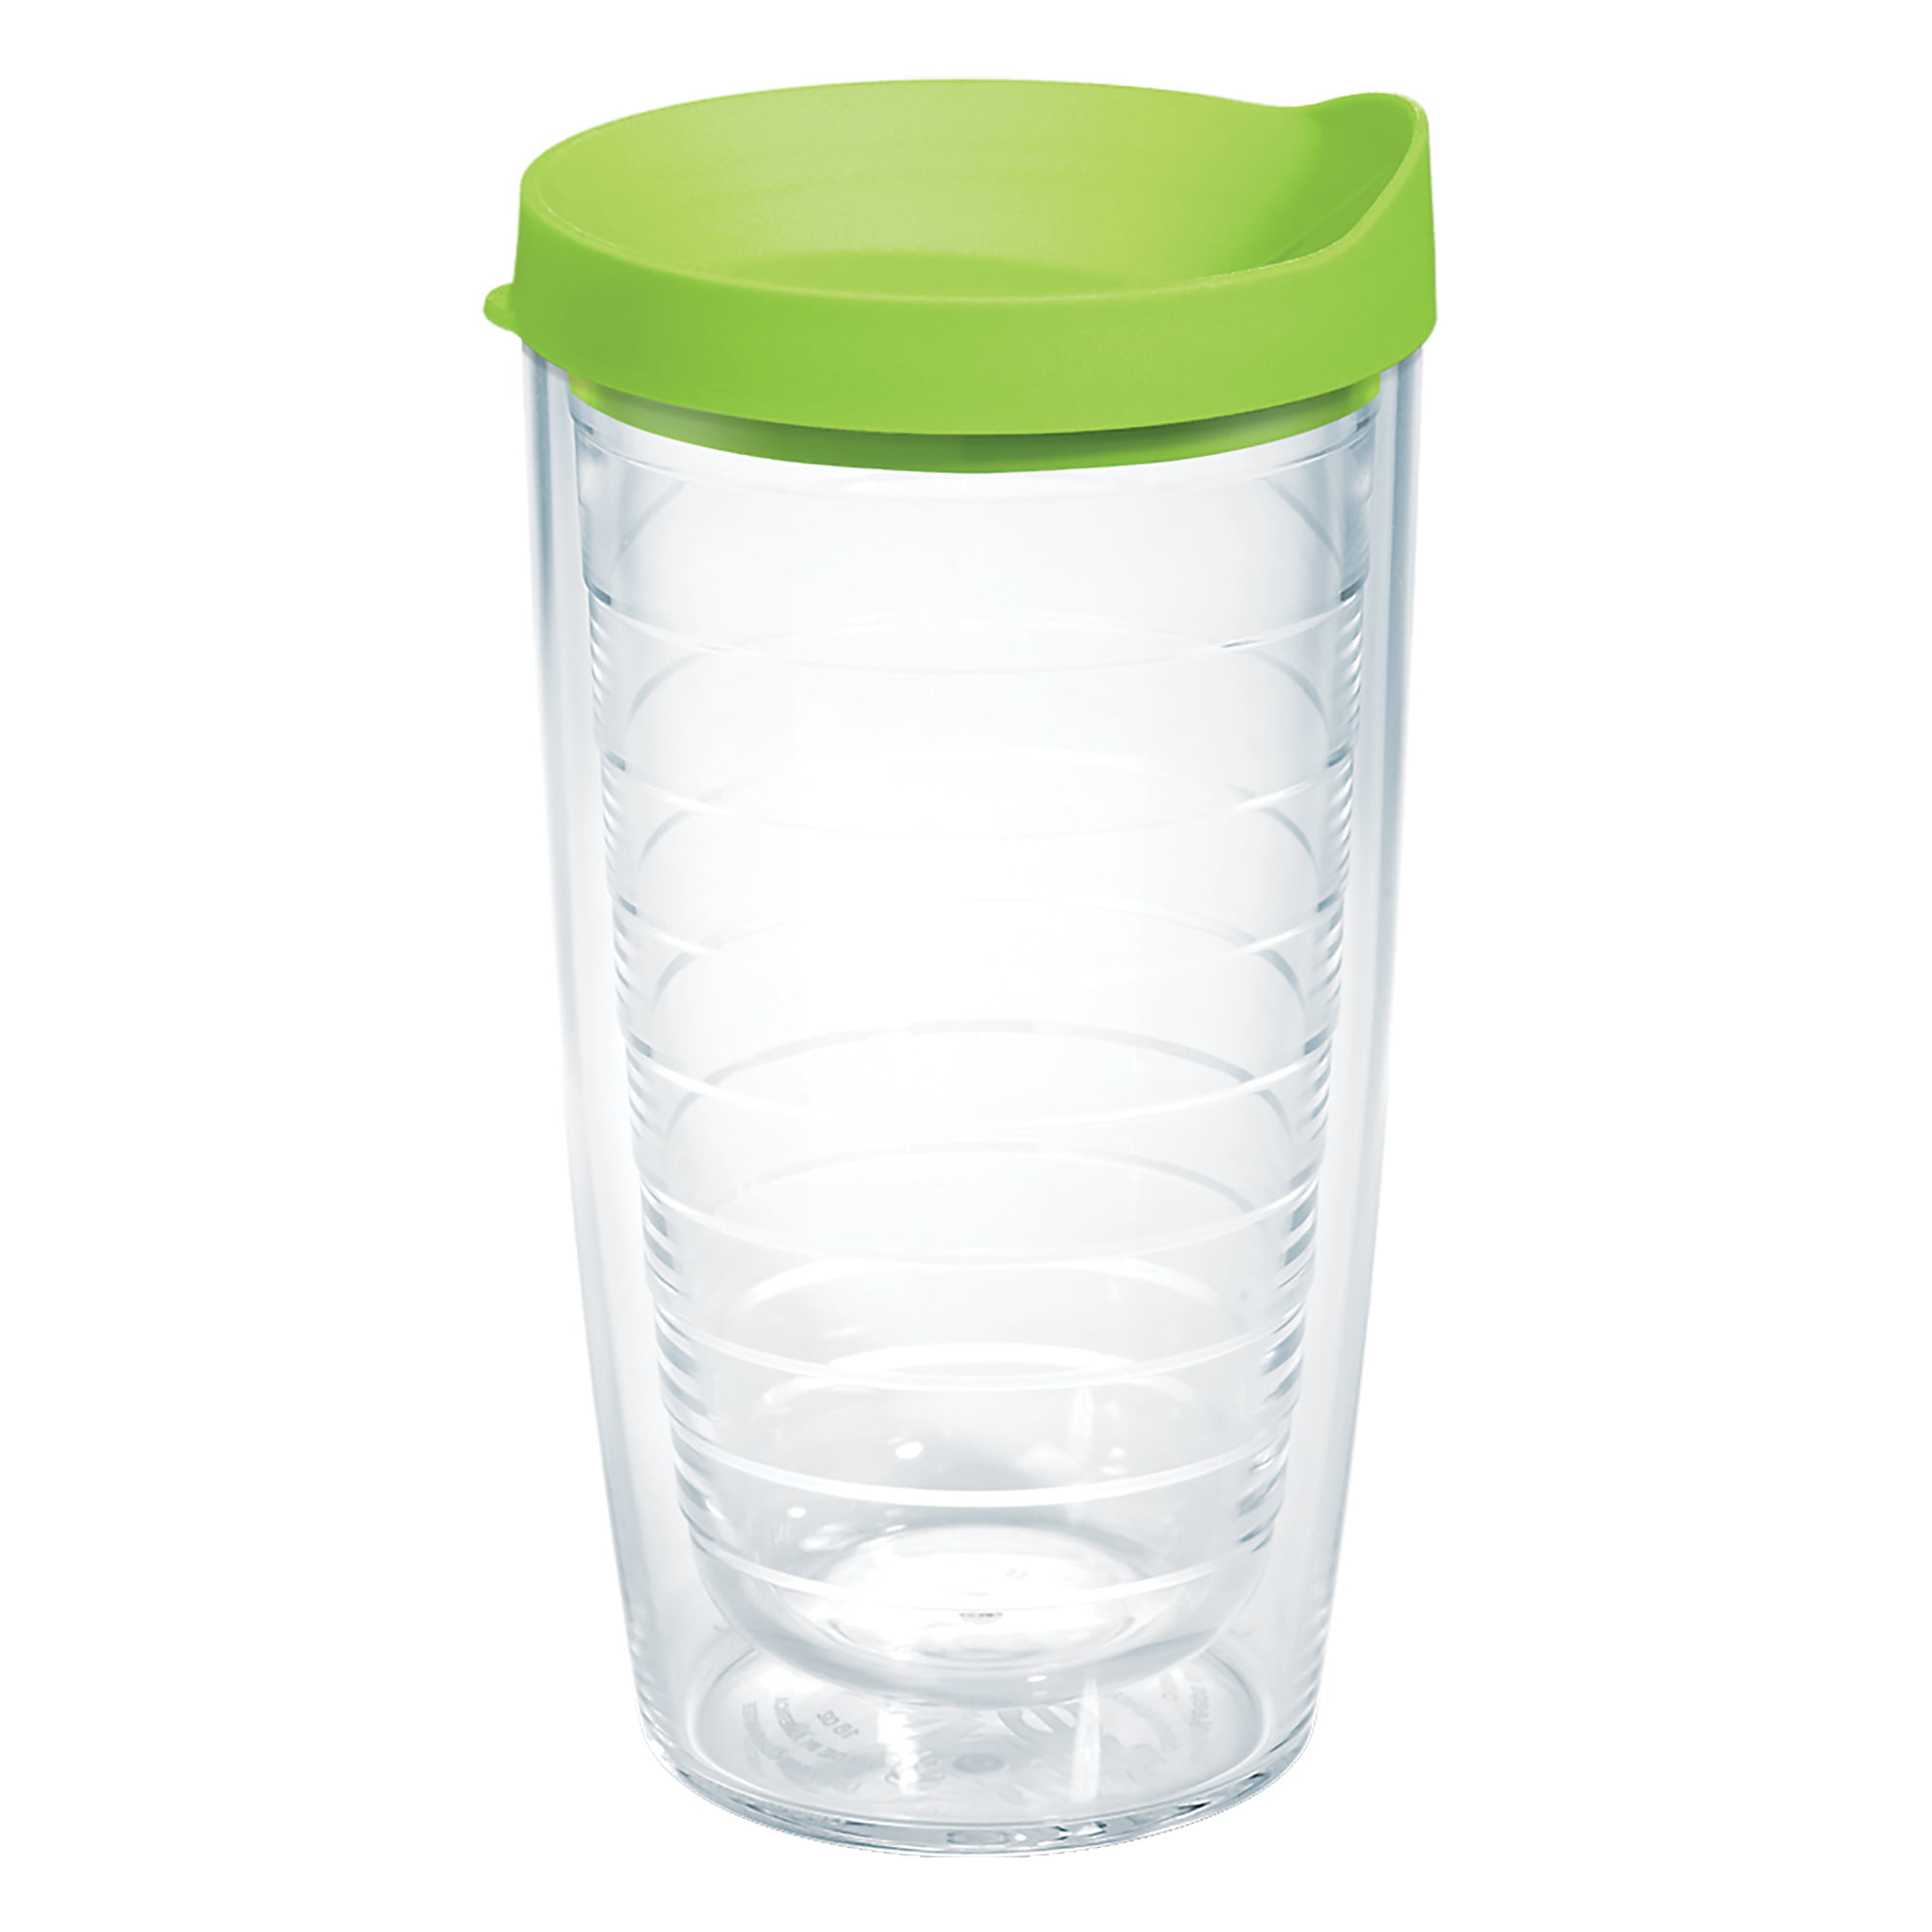 Tervis Tumbler Lime Green Handle Accessory for 24oz Tervis Drinkwear New 